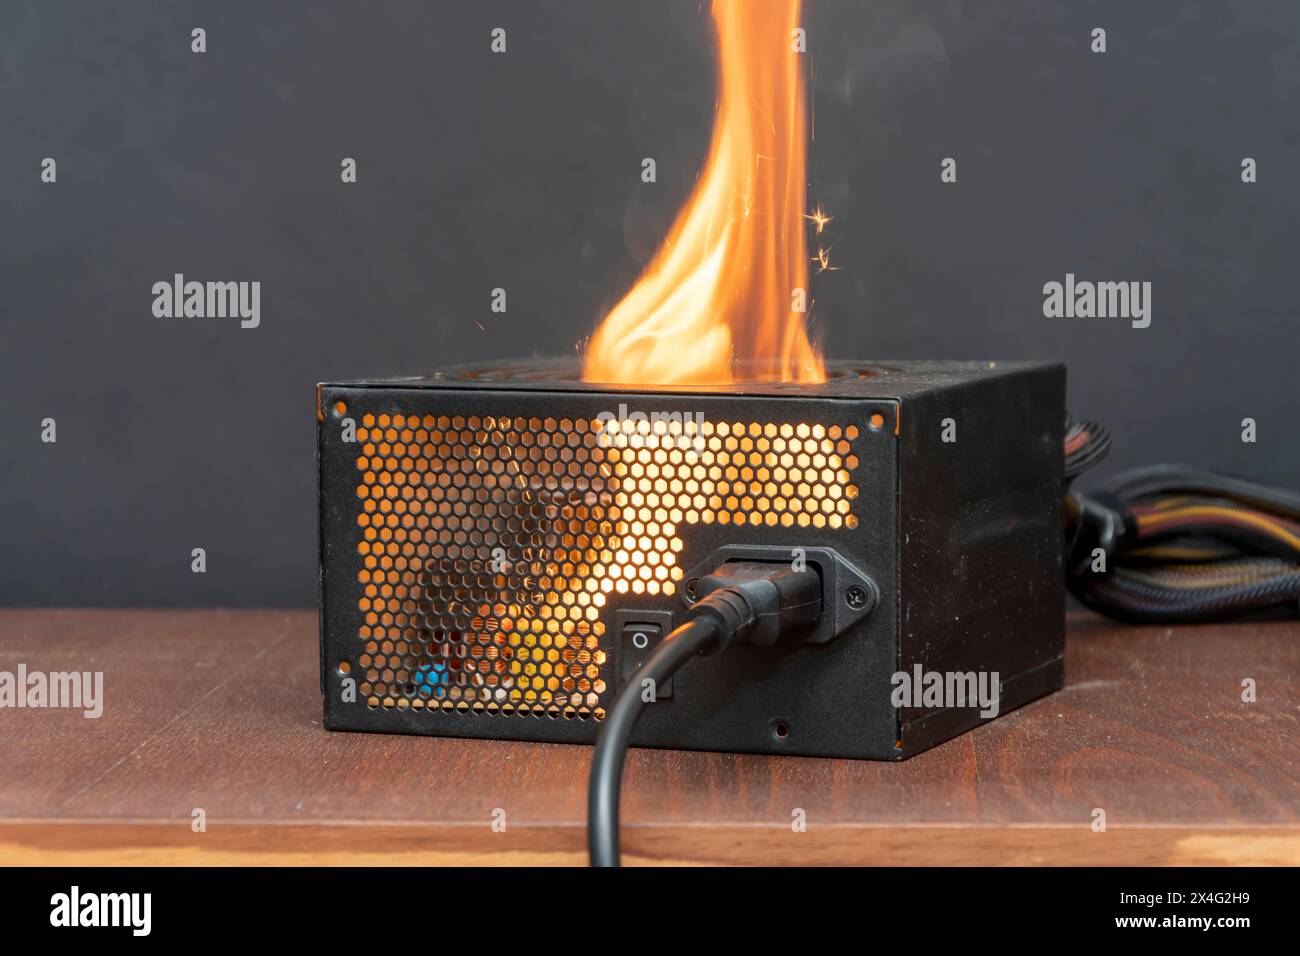 Ignition of the computer power supply, short circuit, close-up, selective focus. A fire in the apartment from household electrical appliances. Stock Photo